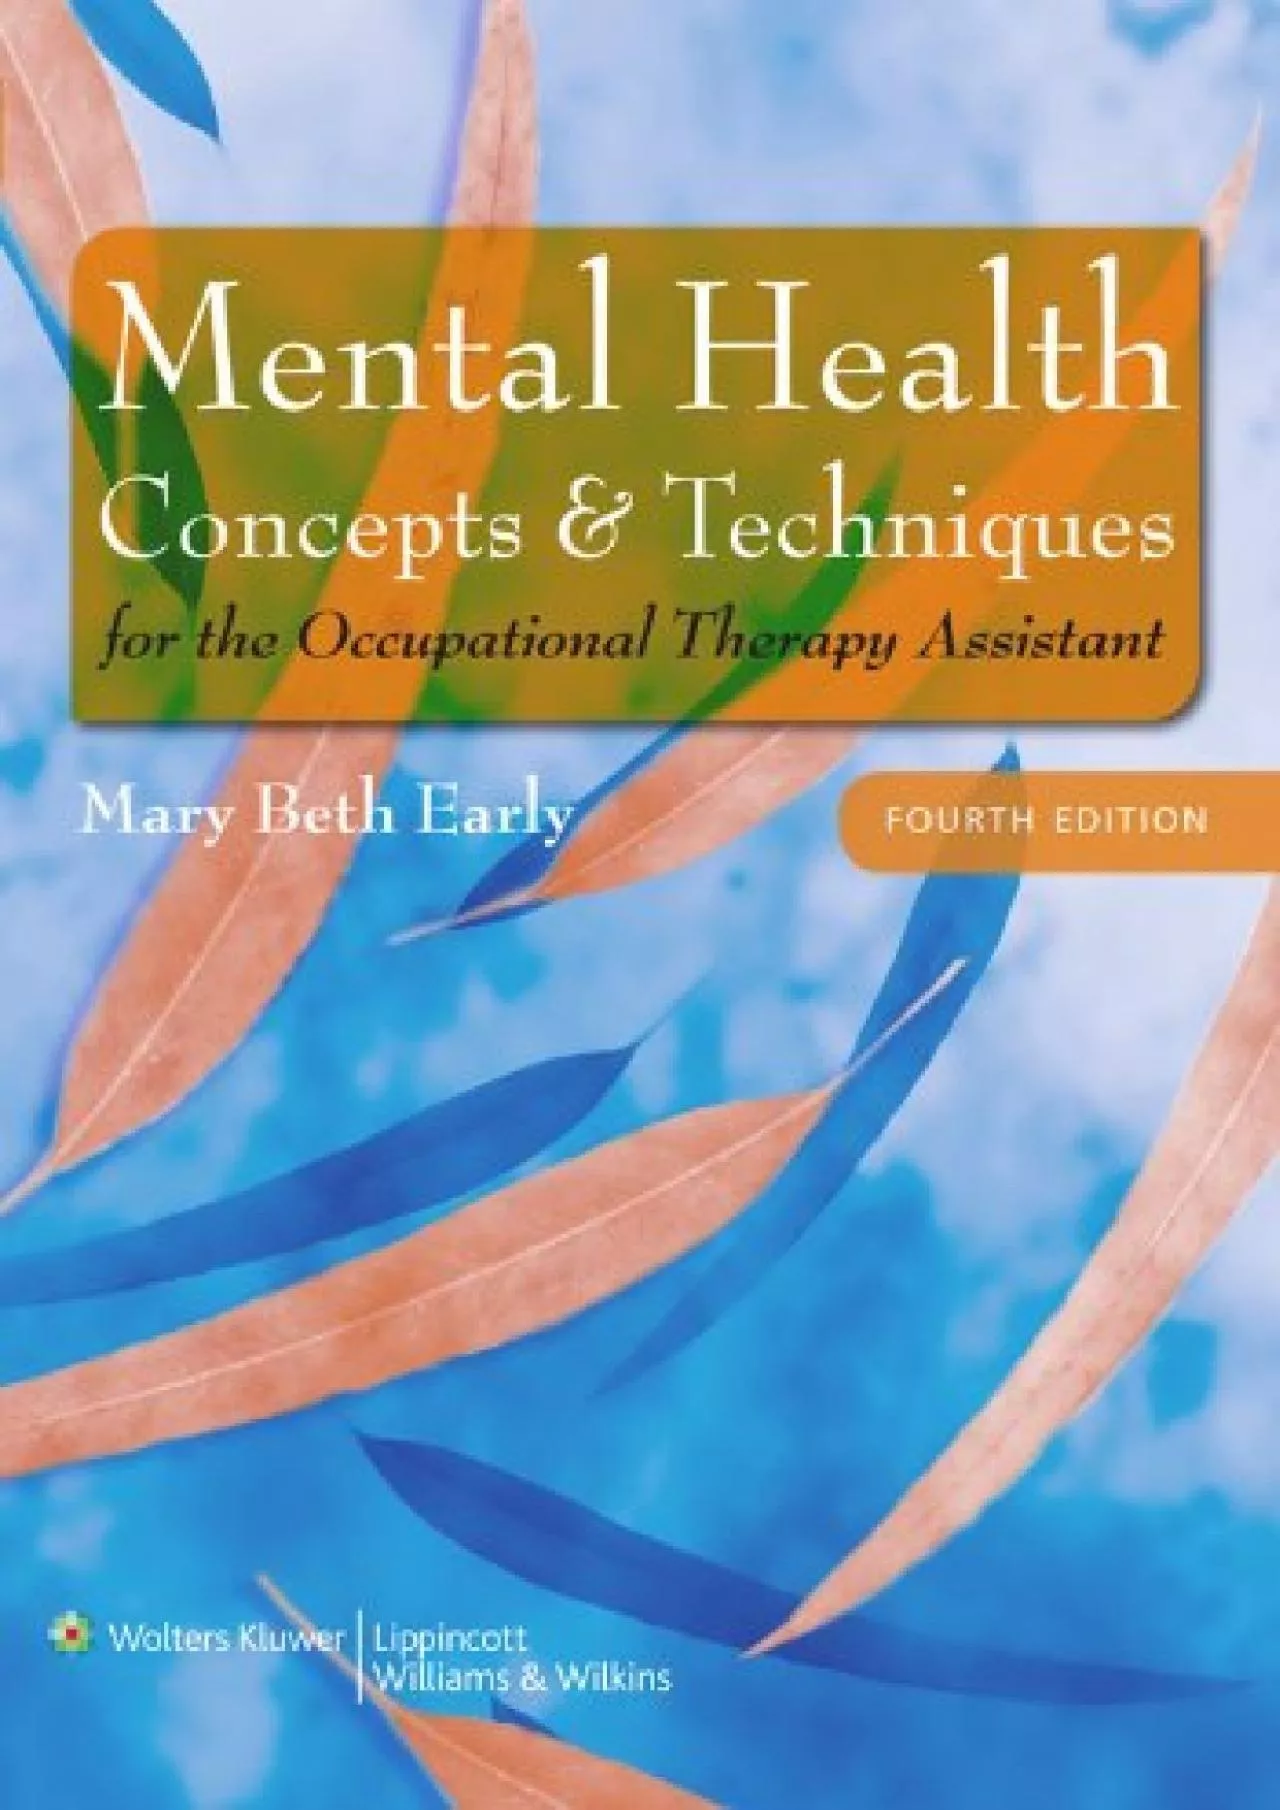 (BOOK)-Mental Health Concepts and Techniques for the Occupational Therapy Assistant (Point